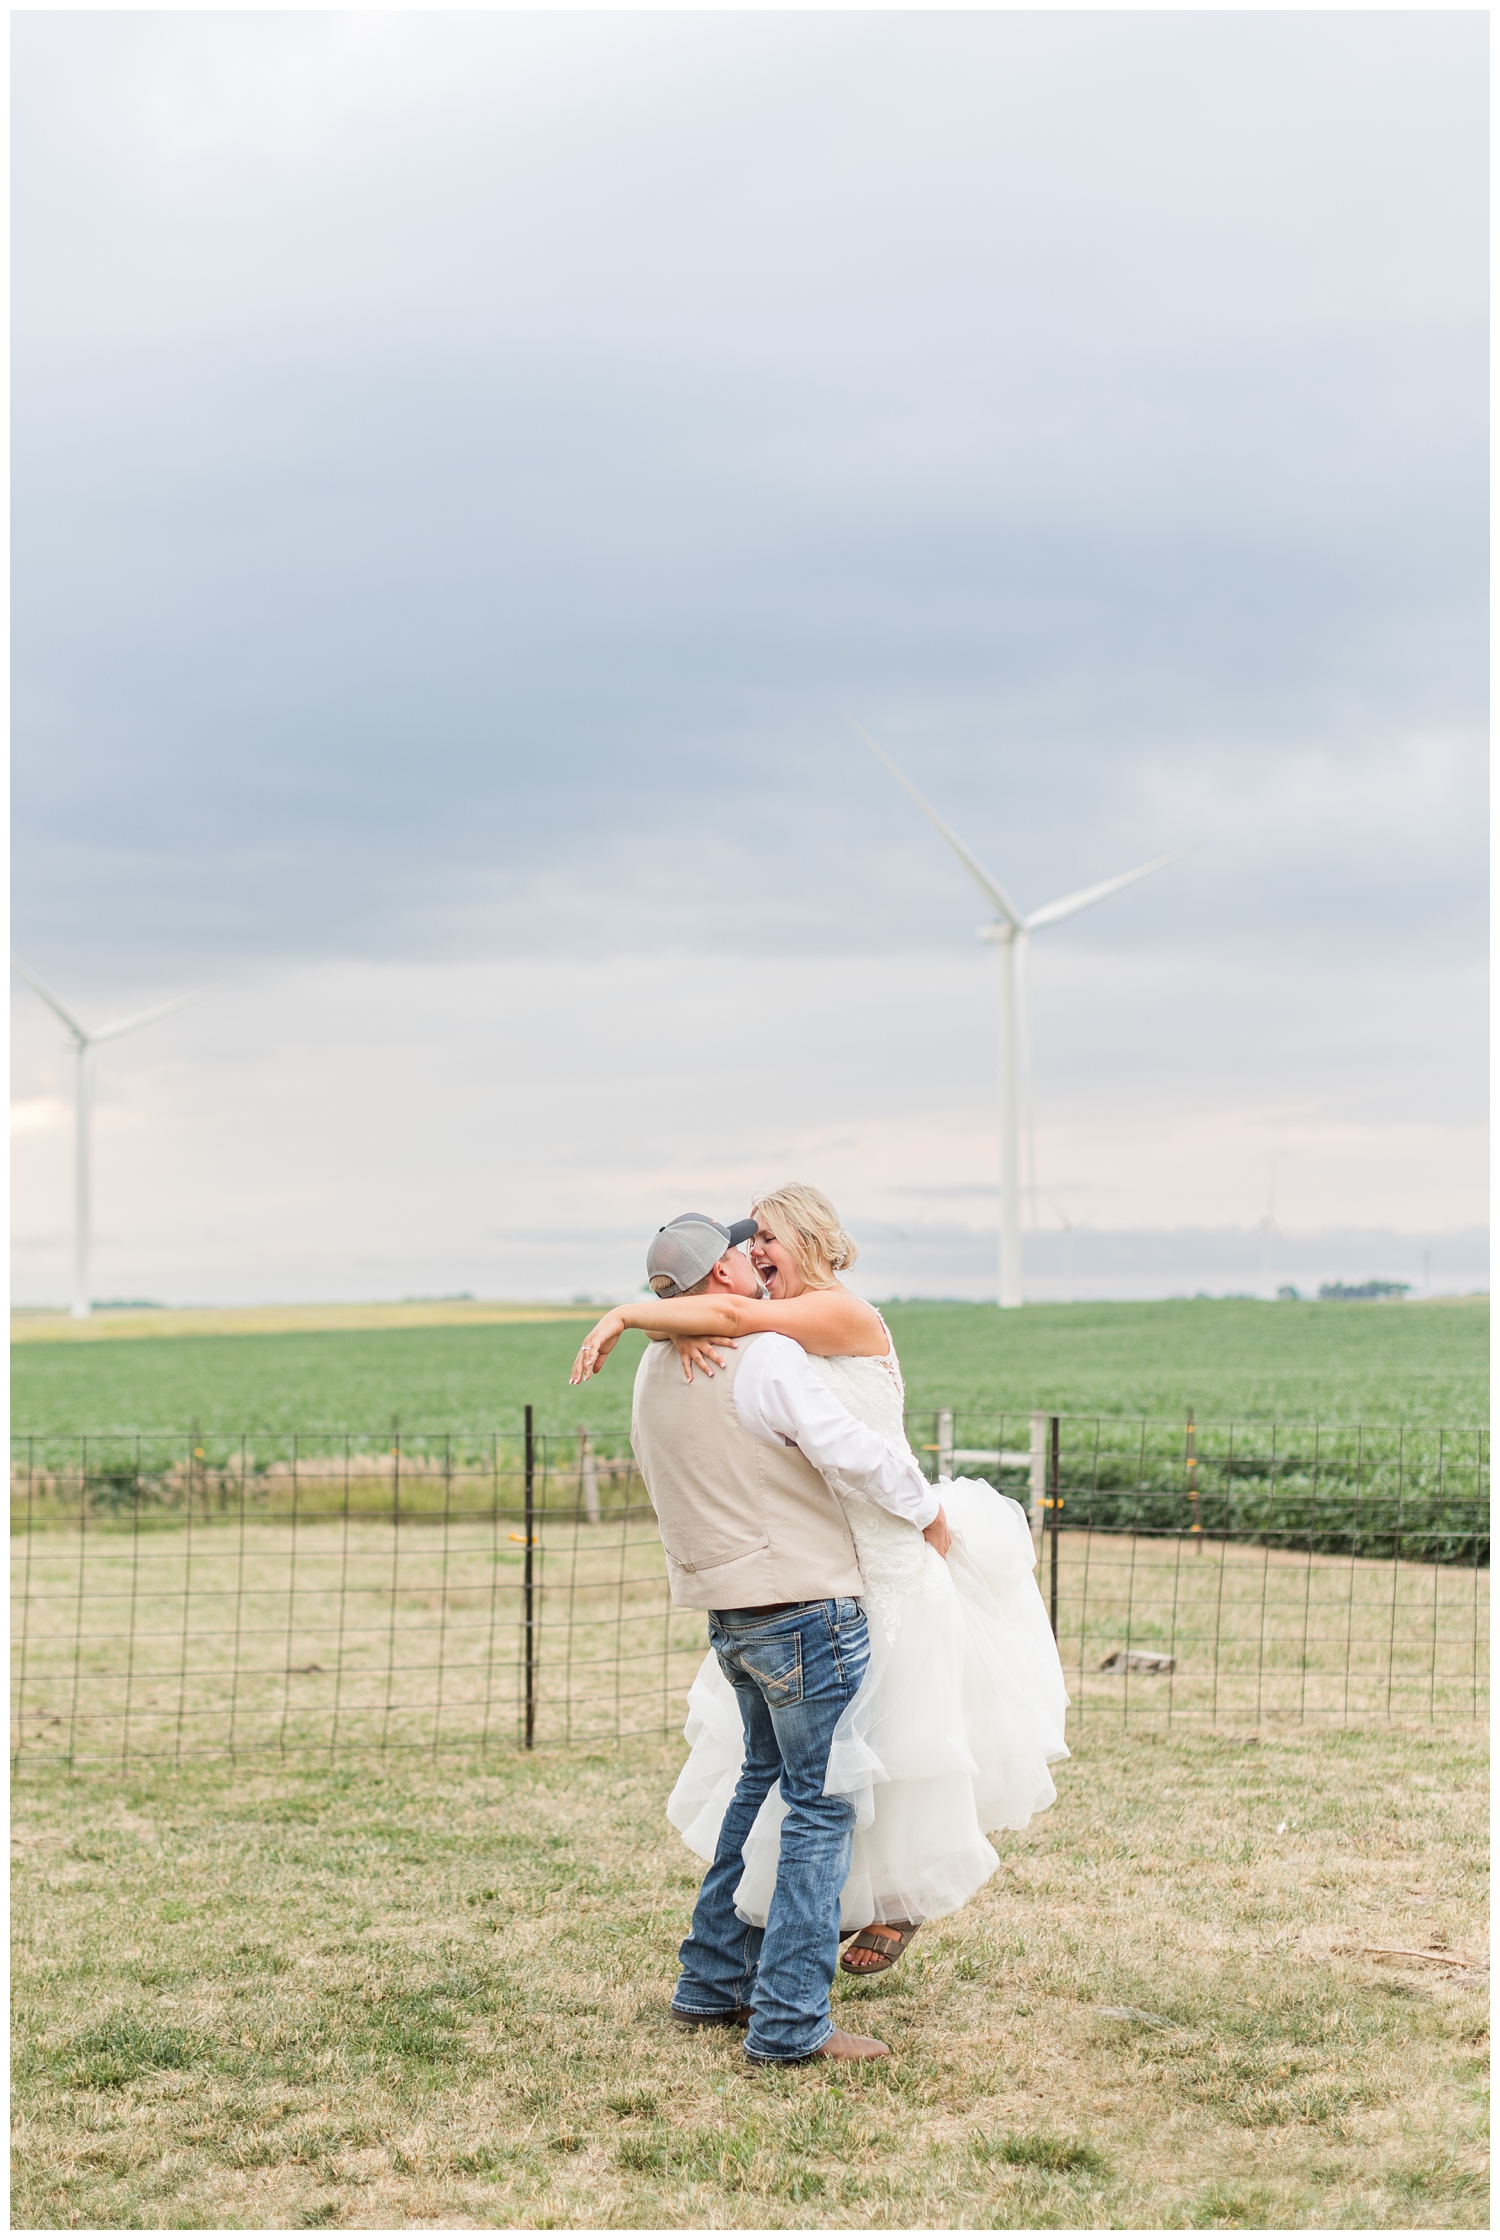 Braden picks up his bride on an Iowa farm with rain clouds and windmills in the background | CB Studio